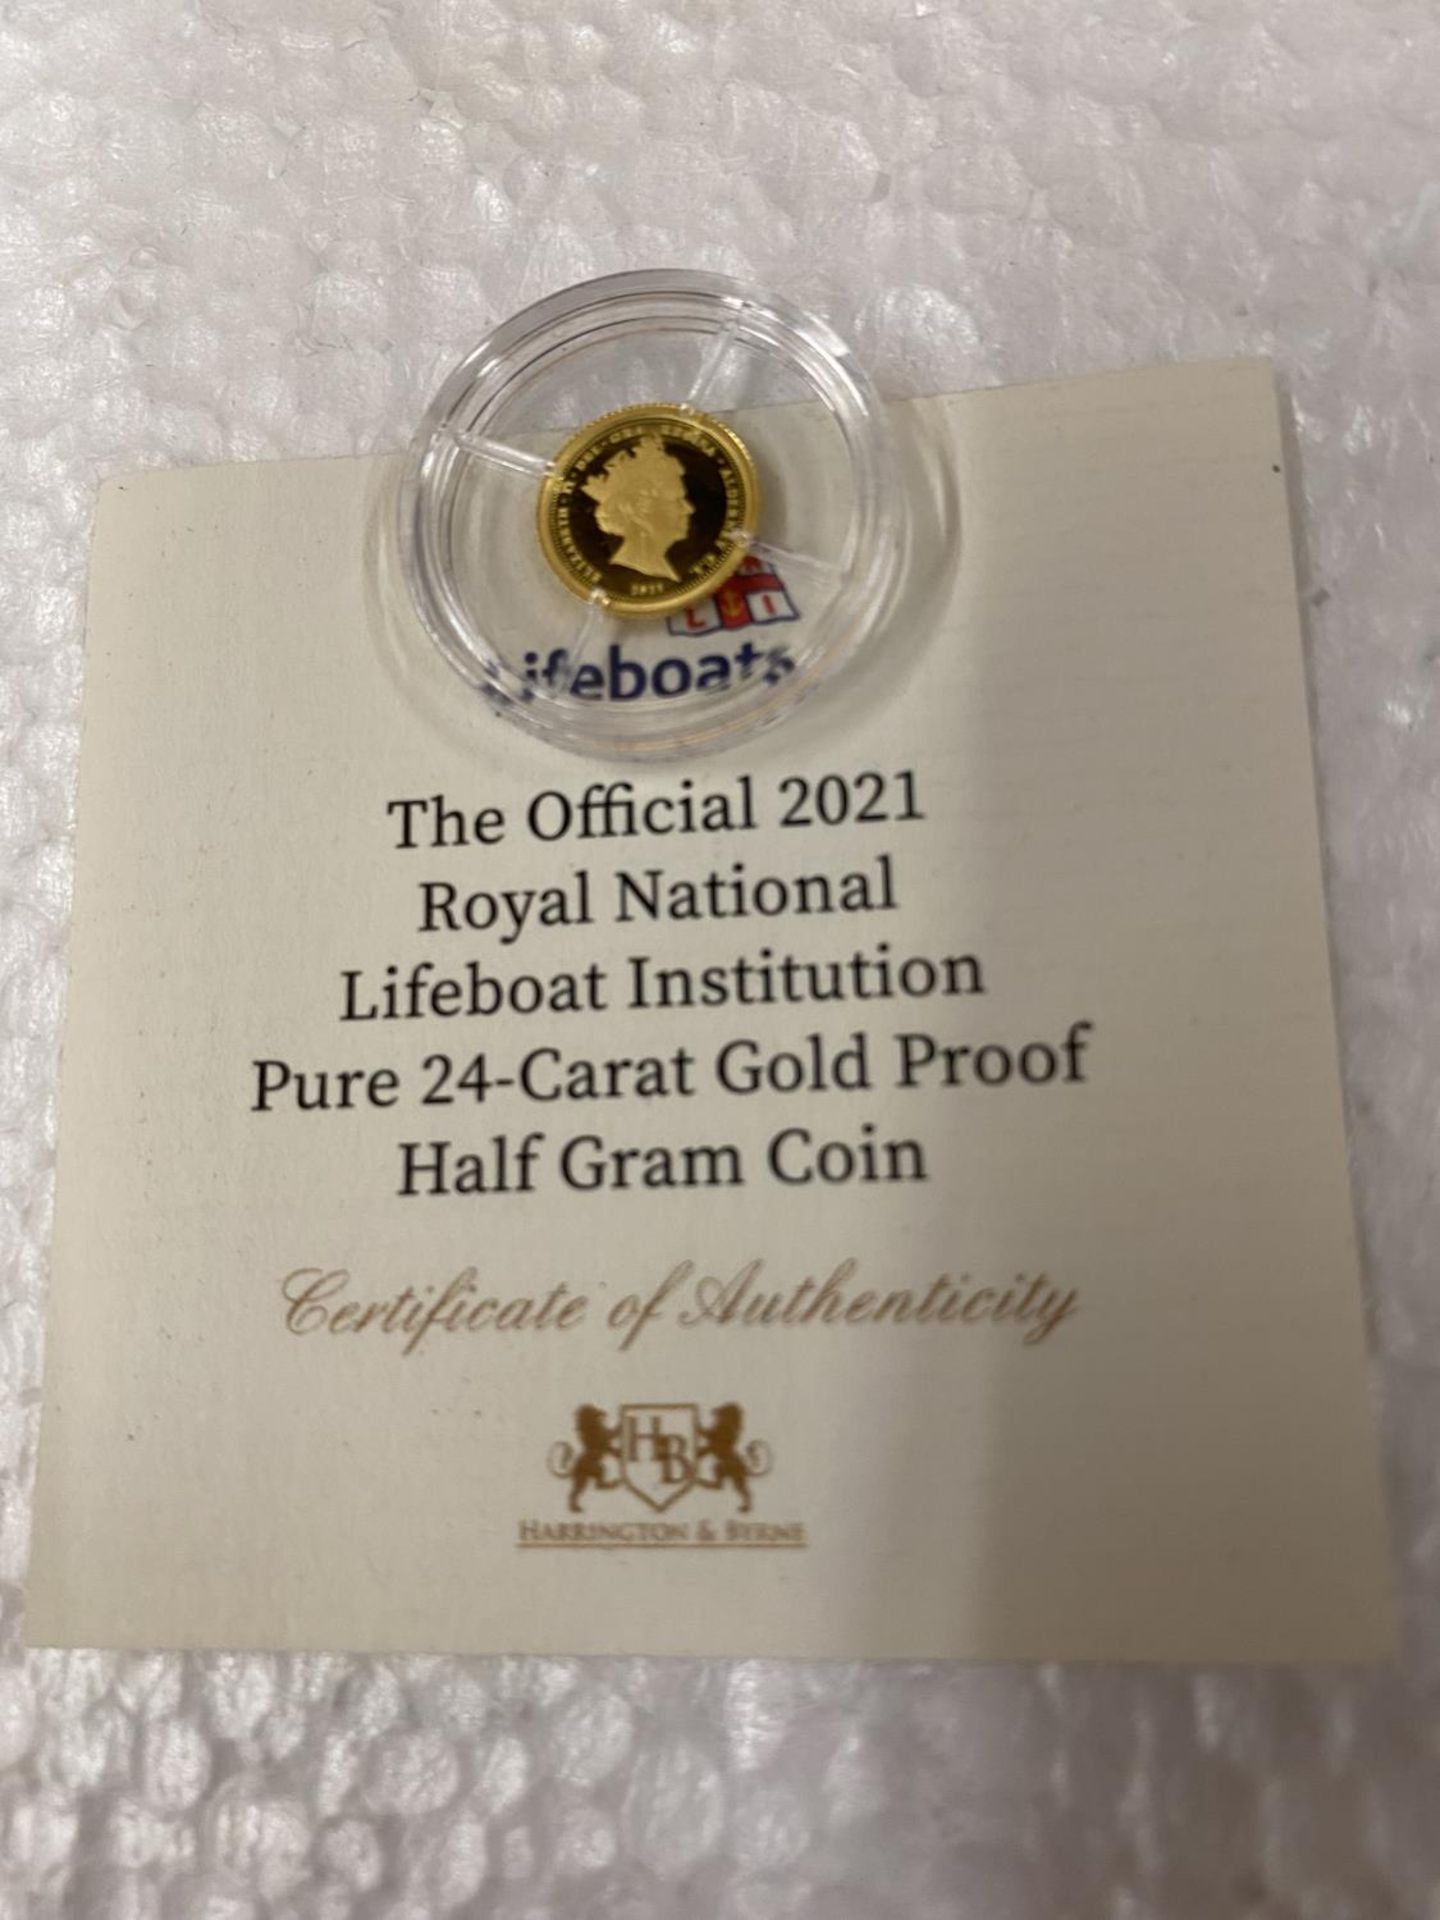 ALDERNEY , CI “THE OFFICIAL 2021 RNLI” A 24 CARAT GOLD PROOF COIN WITH COA . THE COIN WEIGHS 0.5 - Image 2 of 3